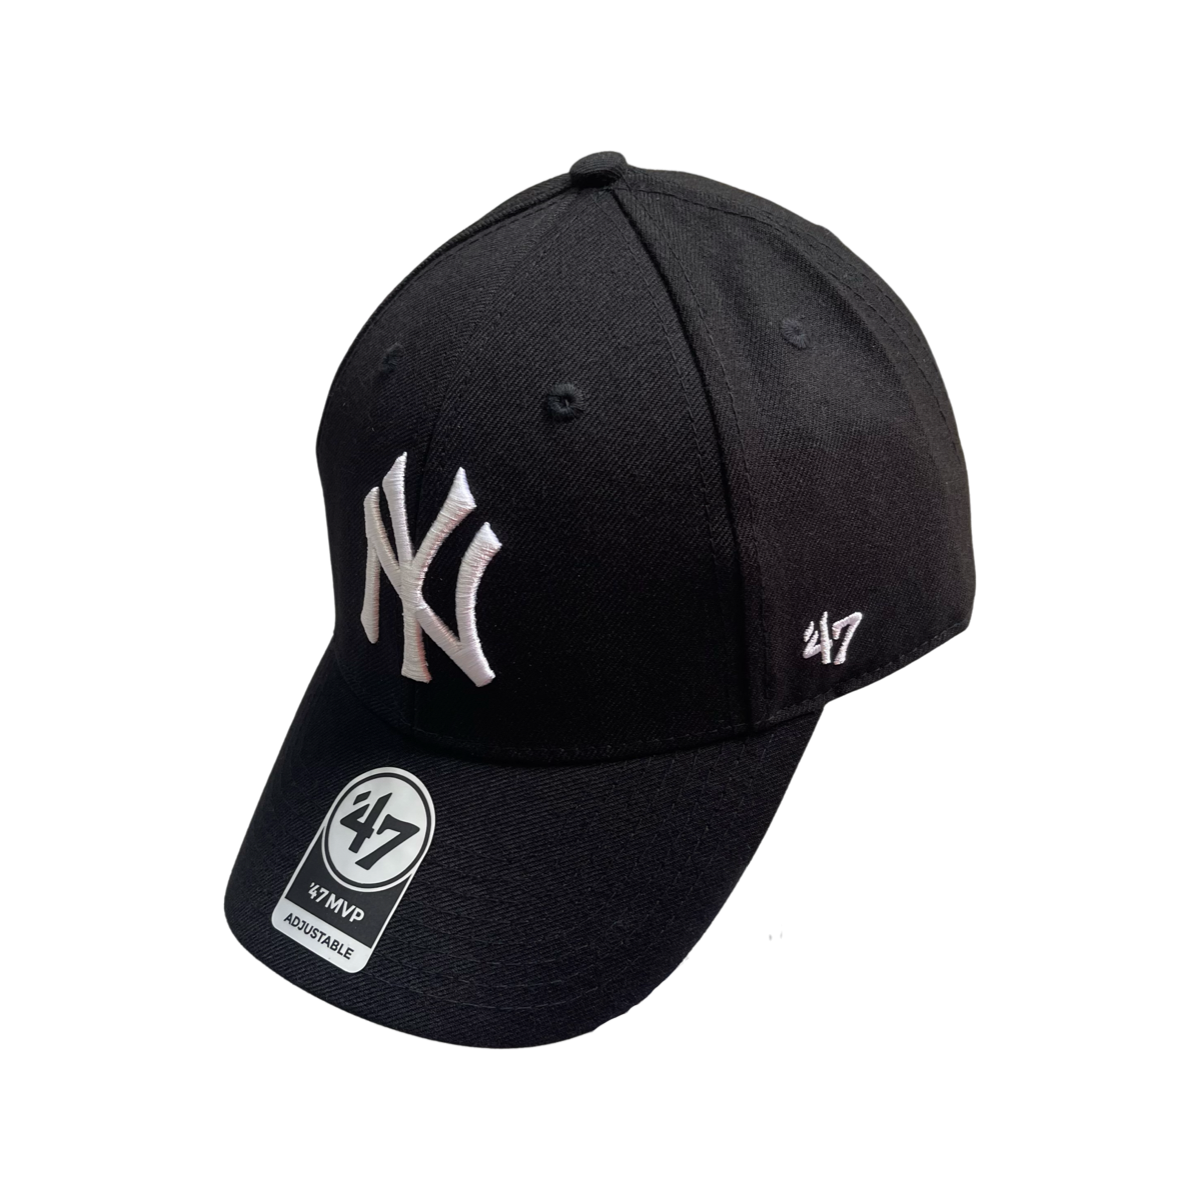 47 Brand MLB snapback cap in grey with white NY embroidery  ASOS